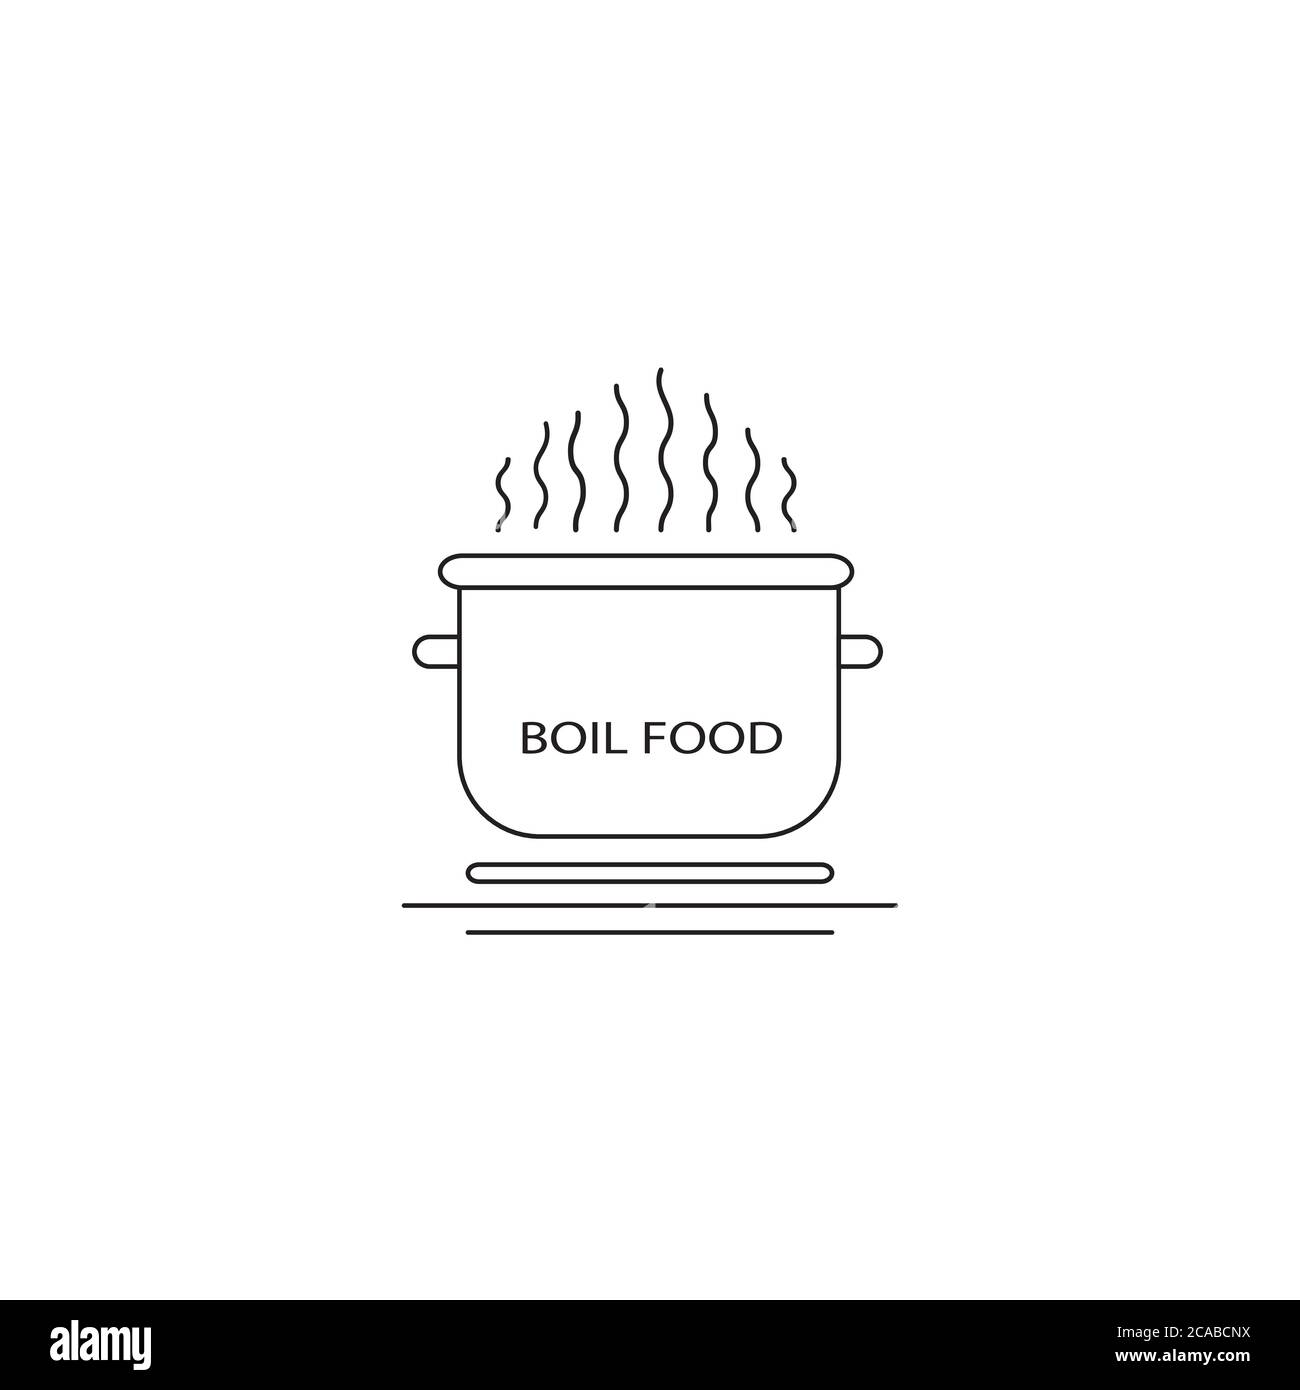 https://c8.alamy.com/comp/2CABCNX/boiling-pot-on-fire-icon-cooking-pot-icon-boil-food-line-icon-outline-vector-sign-linear-style-pictogram-isolated-on-white-boiling-pot-simple-icon-2CABCNX.jpg